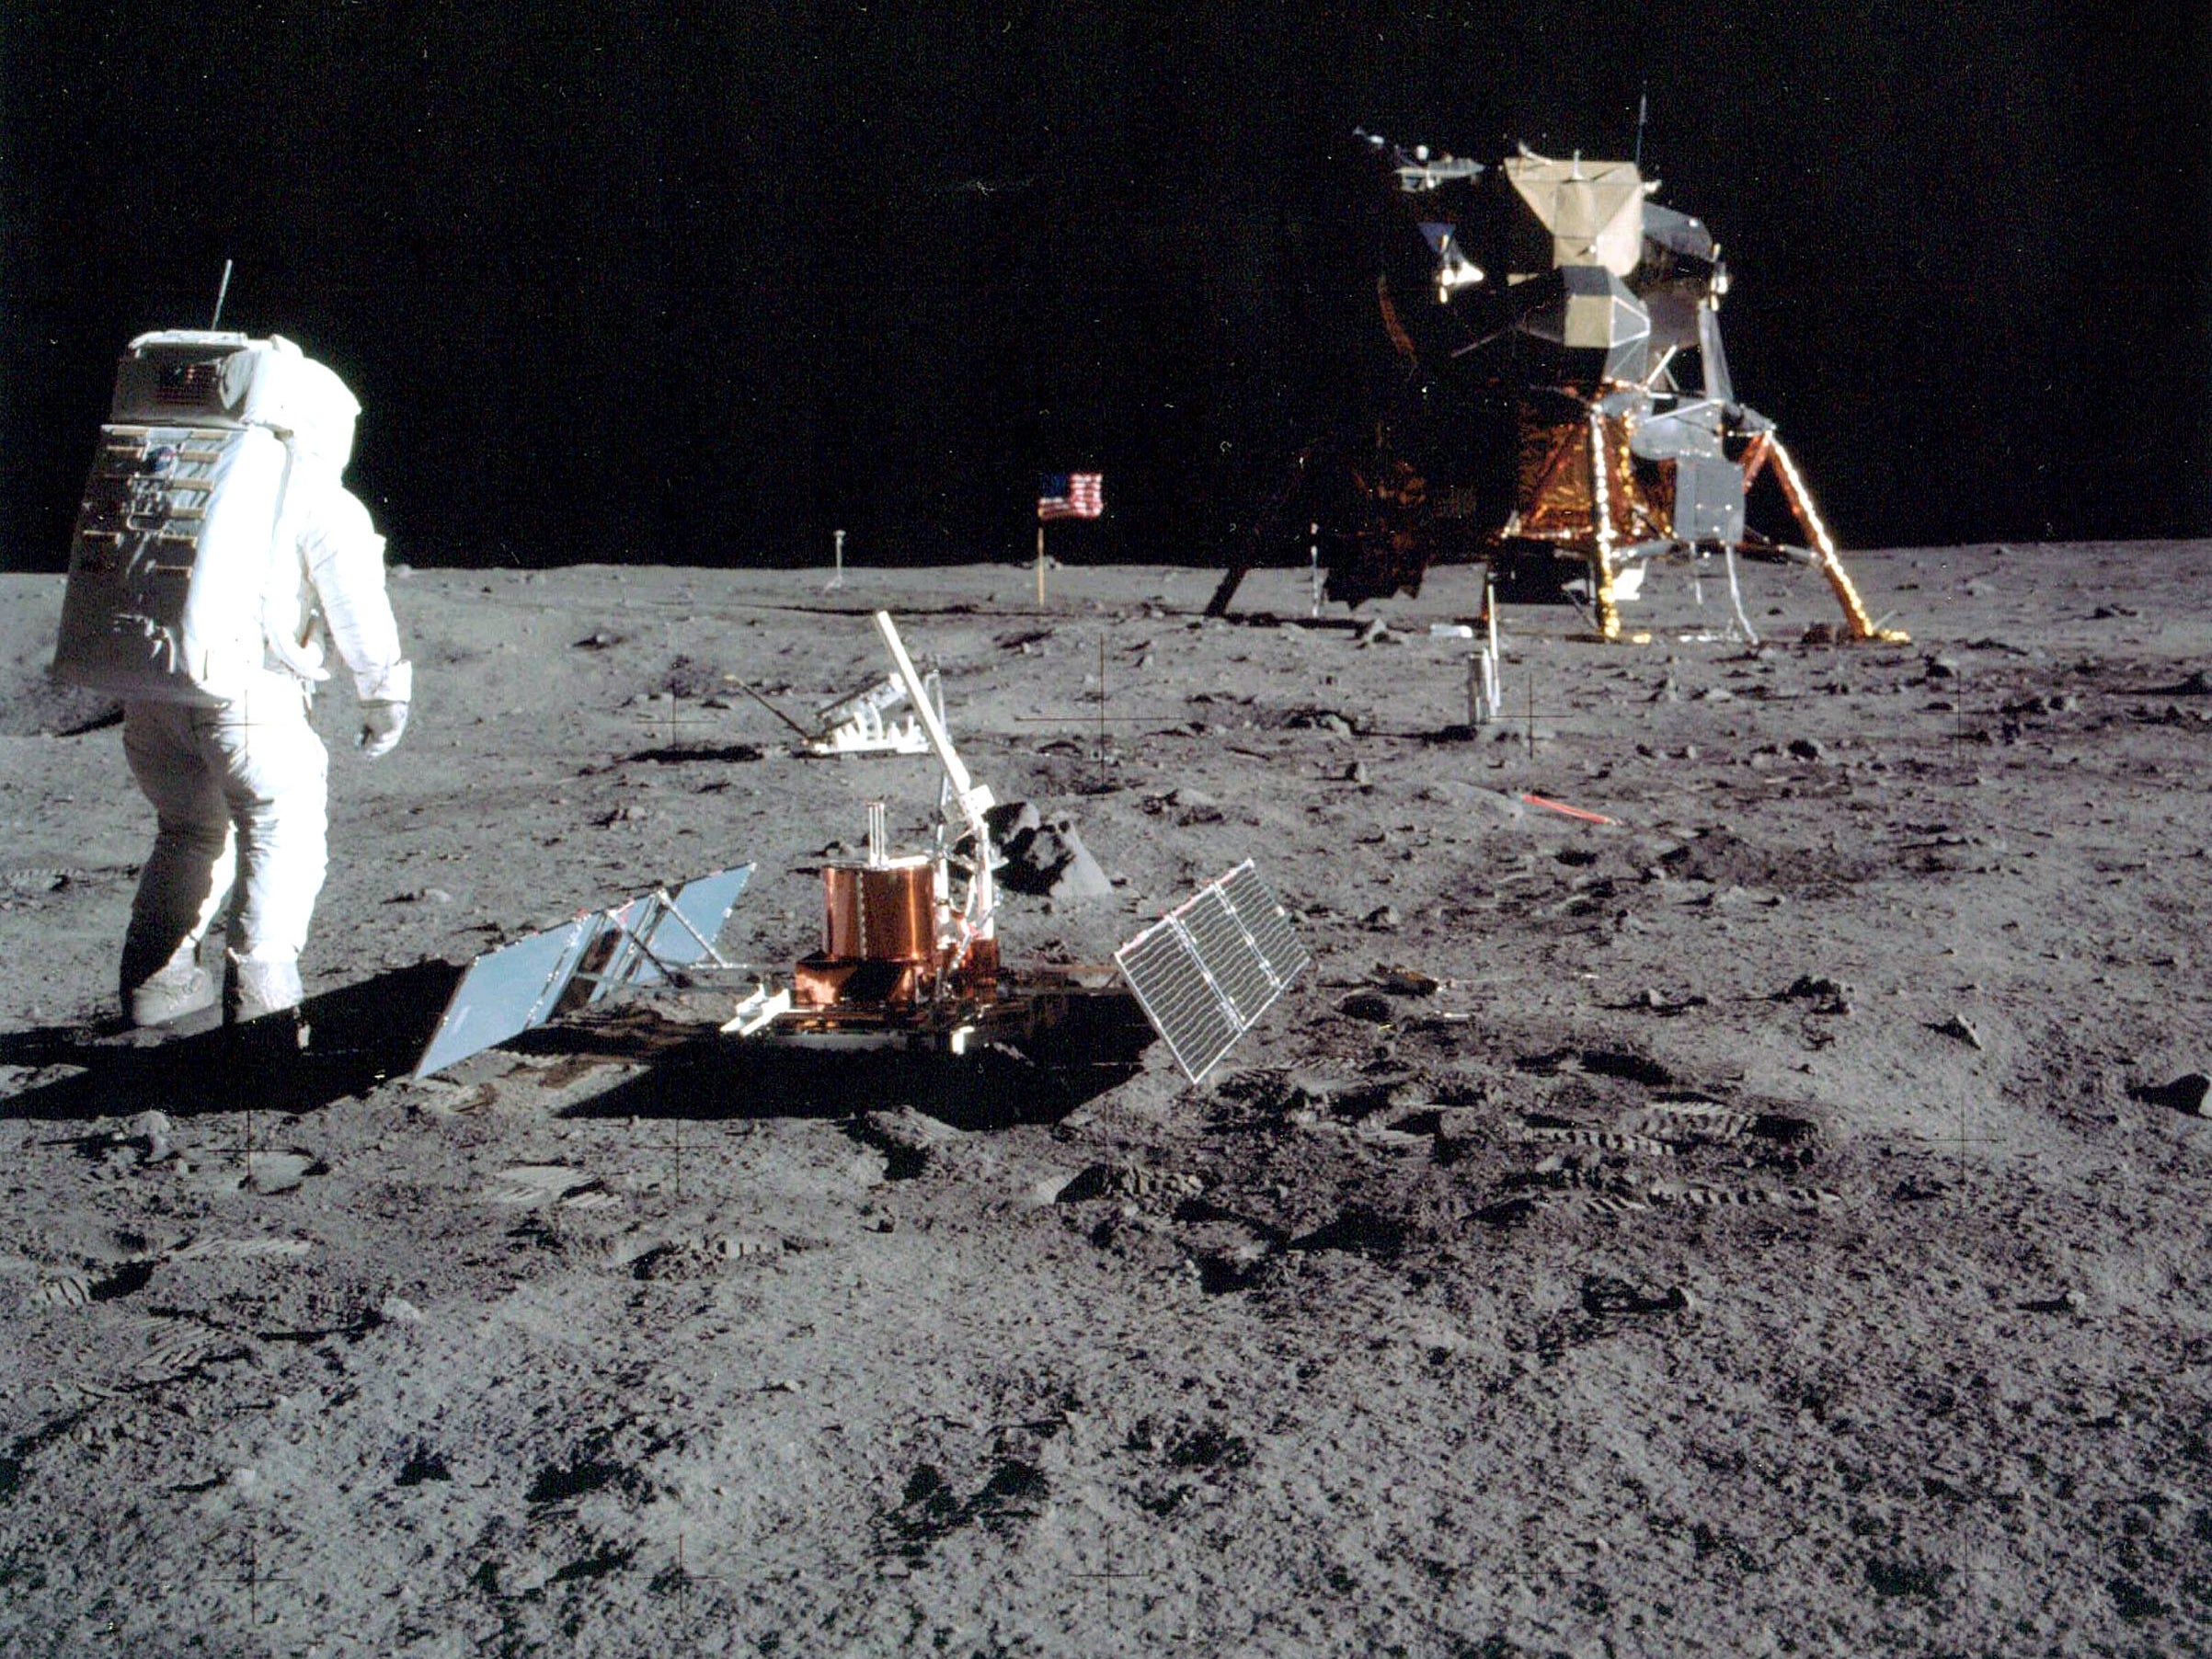 First steps: Buzz Aldrin on the Moon in 1969